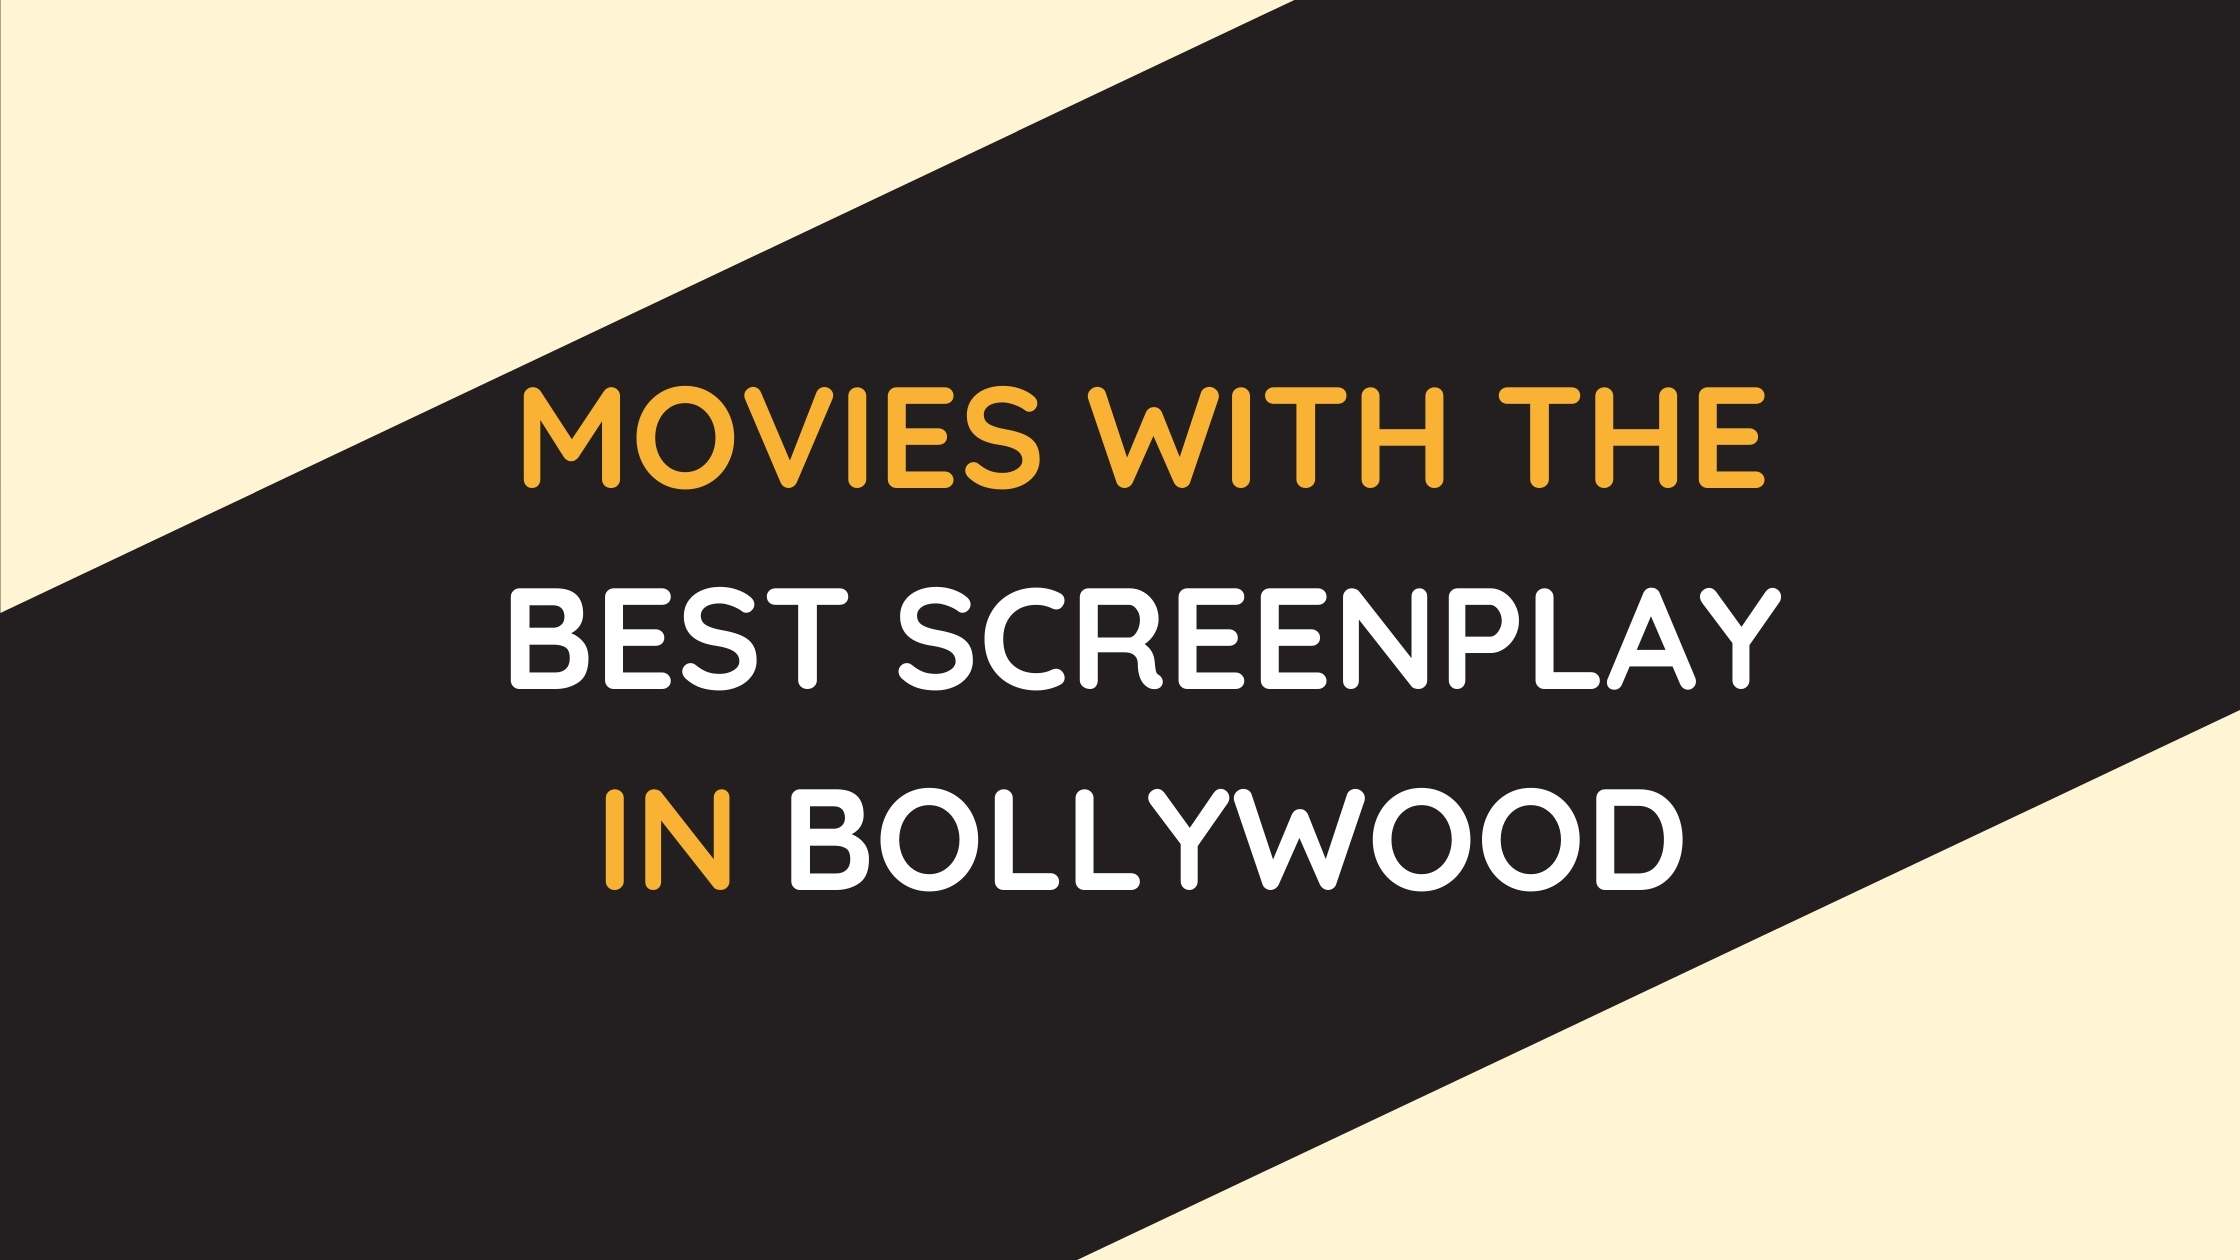 Bollywood movies with the best screenplay